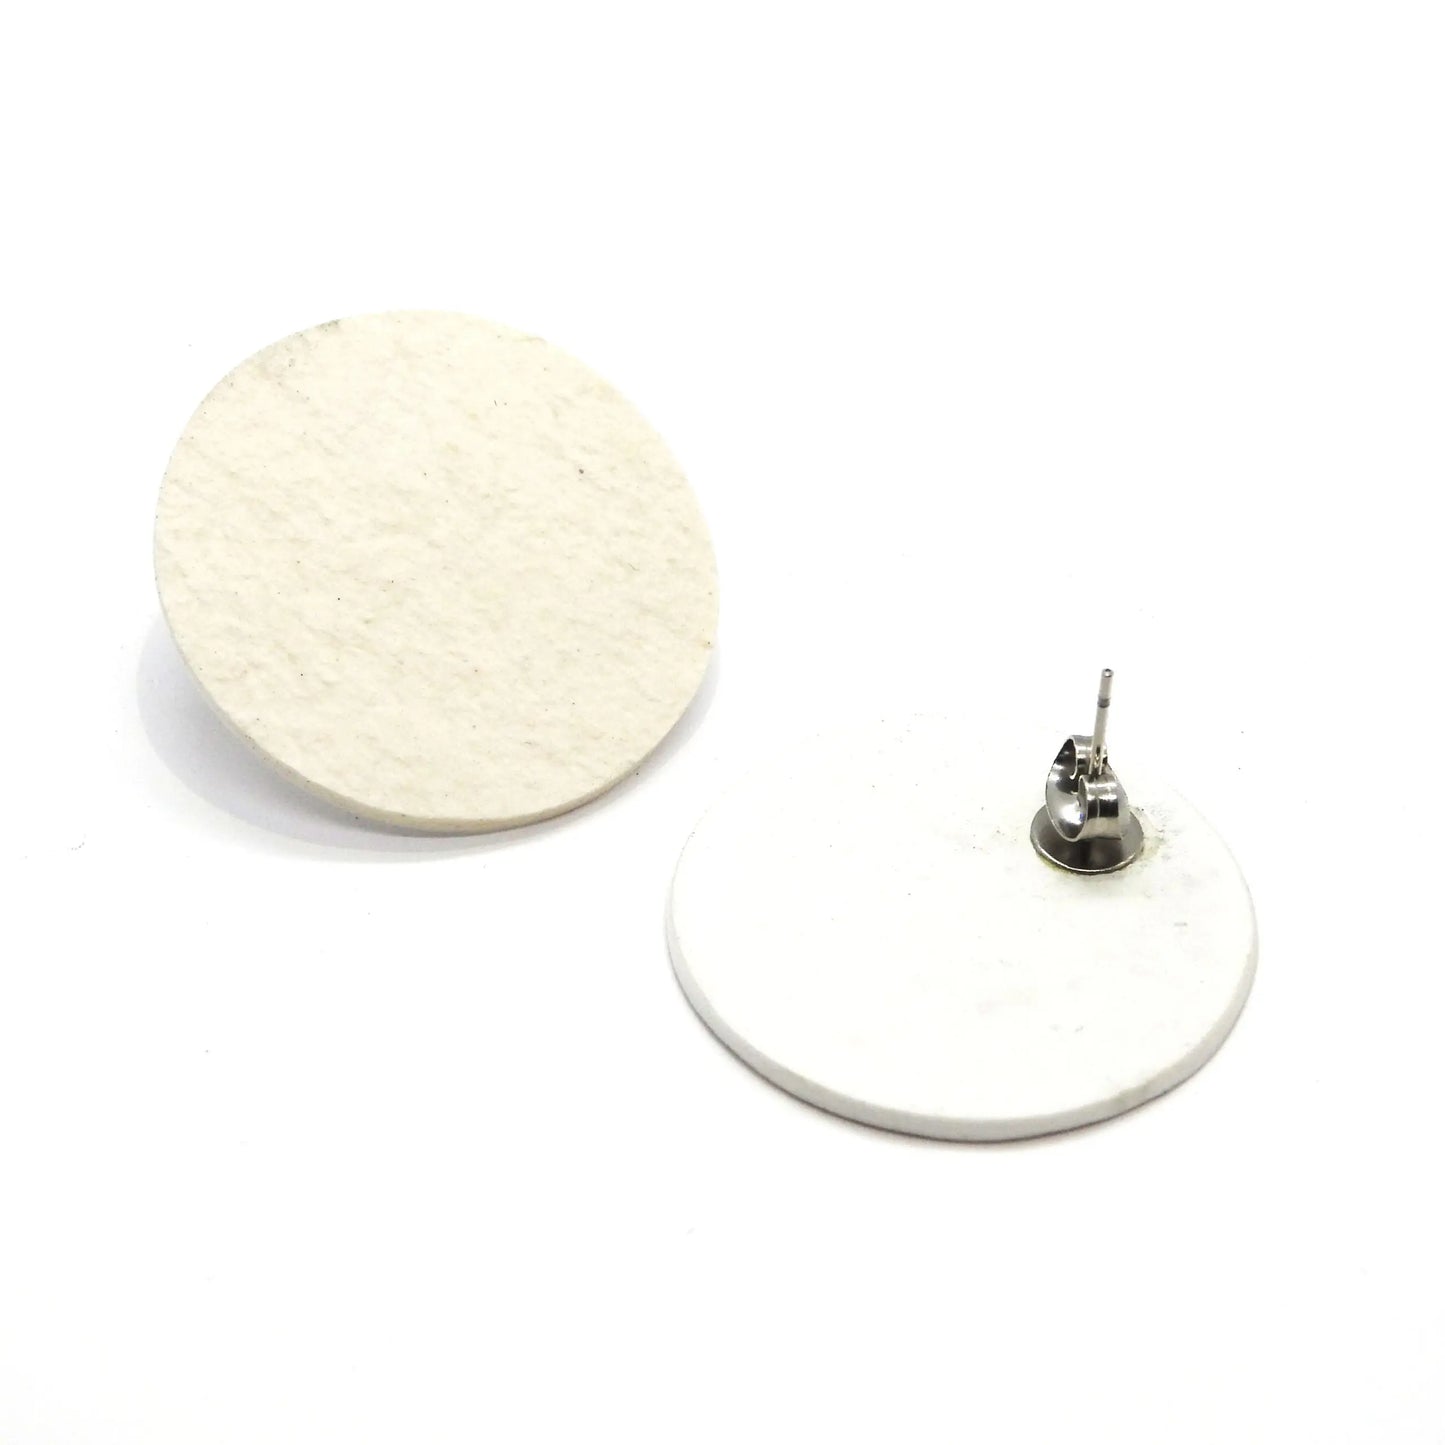 Minimalist slate and marble Earrings ORBIT - Soft Snow. Nature-inspired round white earrings by Seif Design, crafted with unique stone elements.